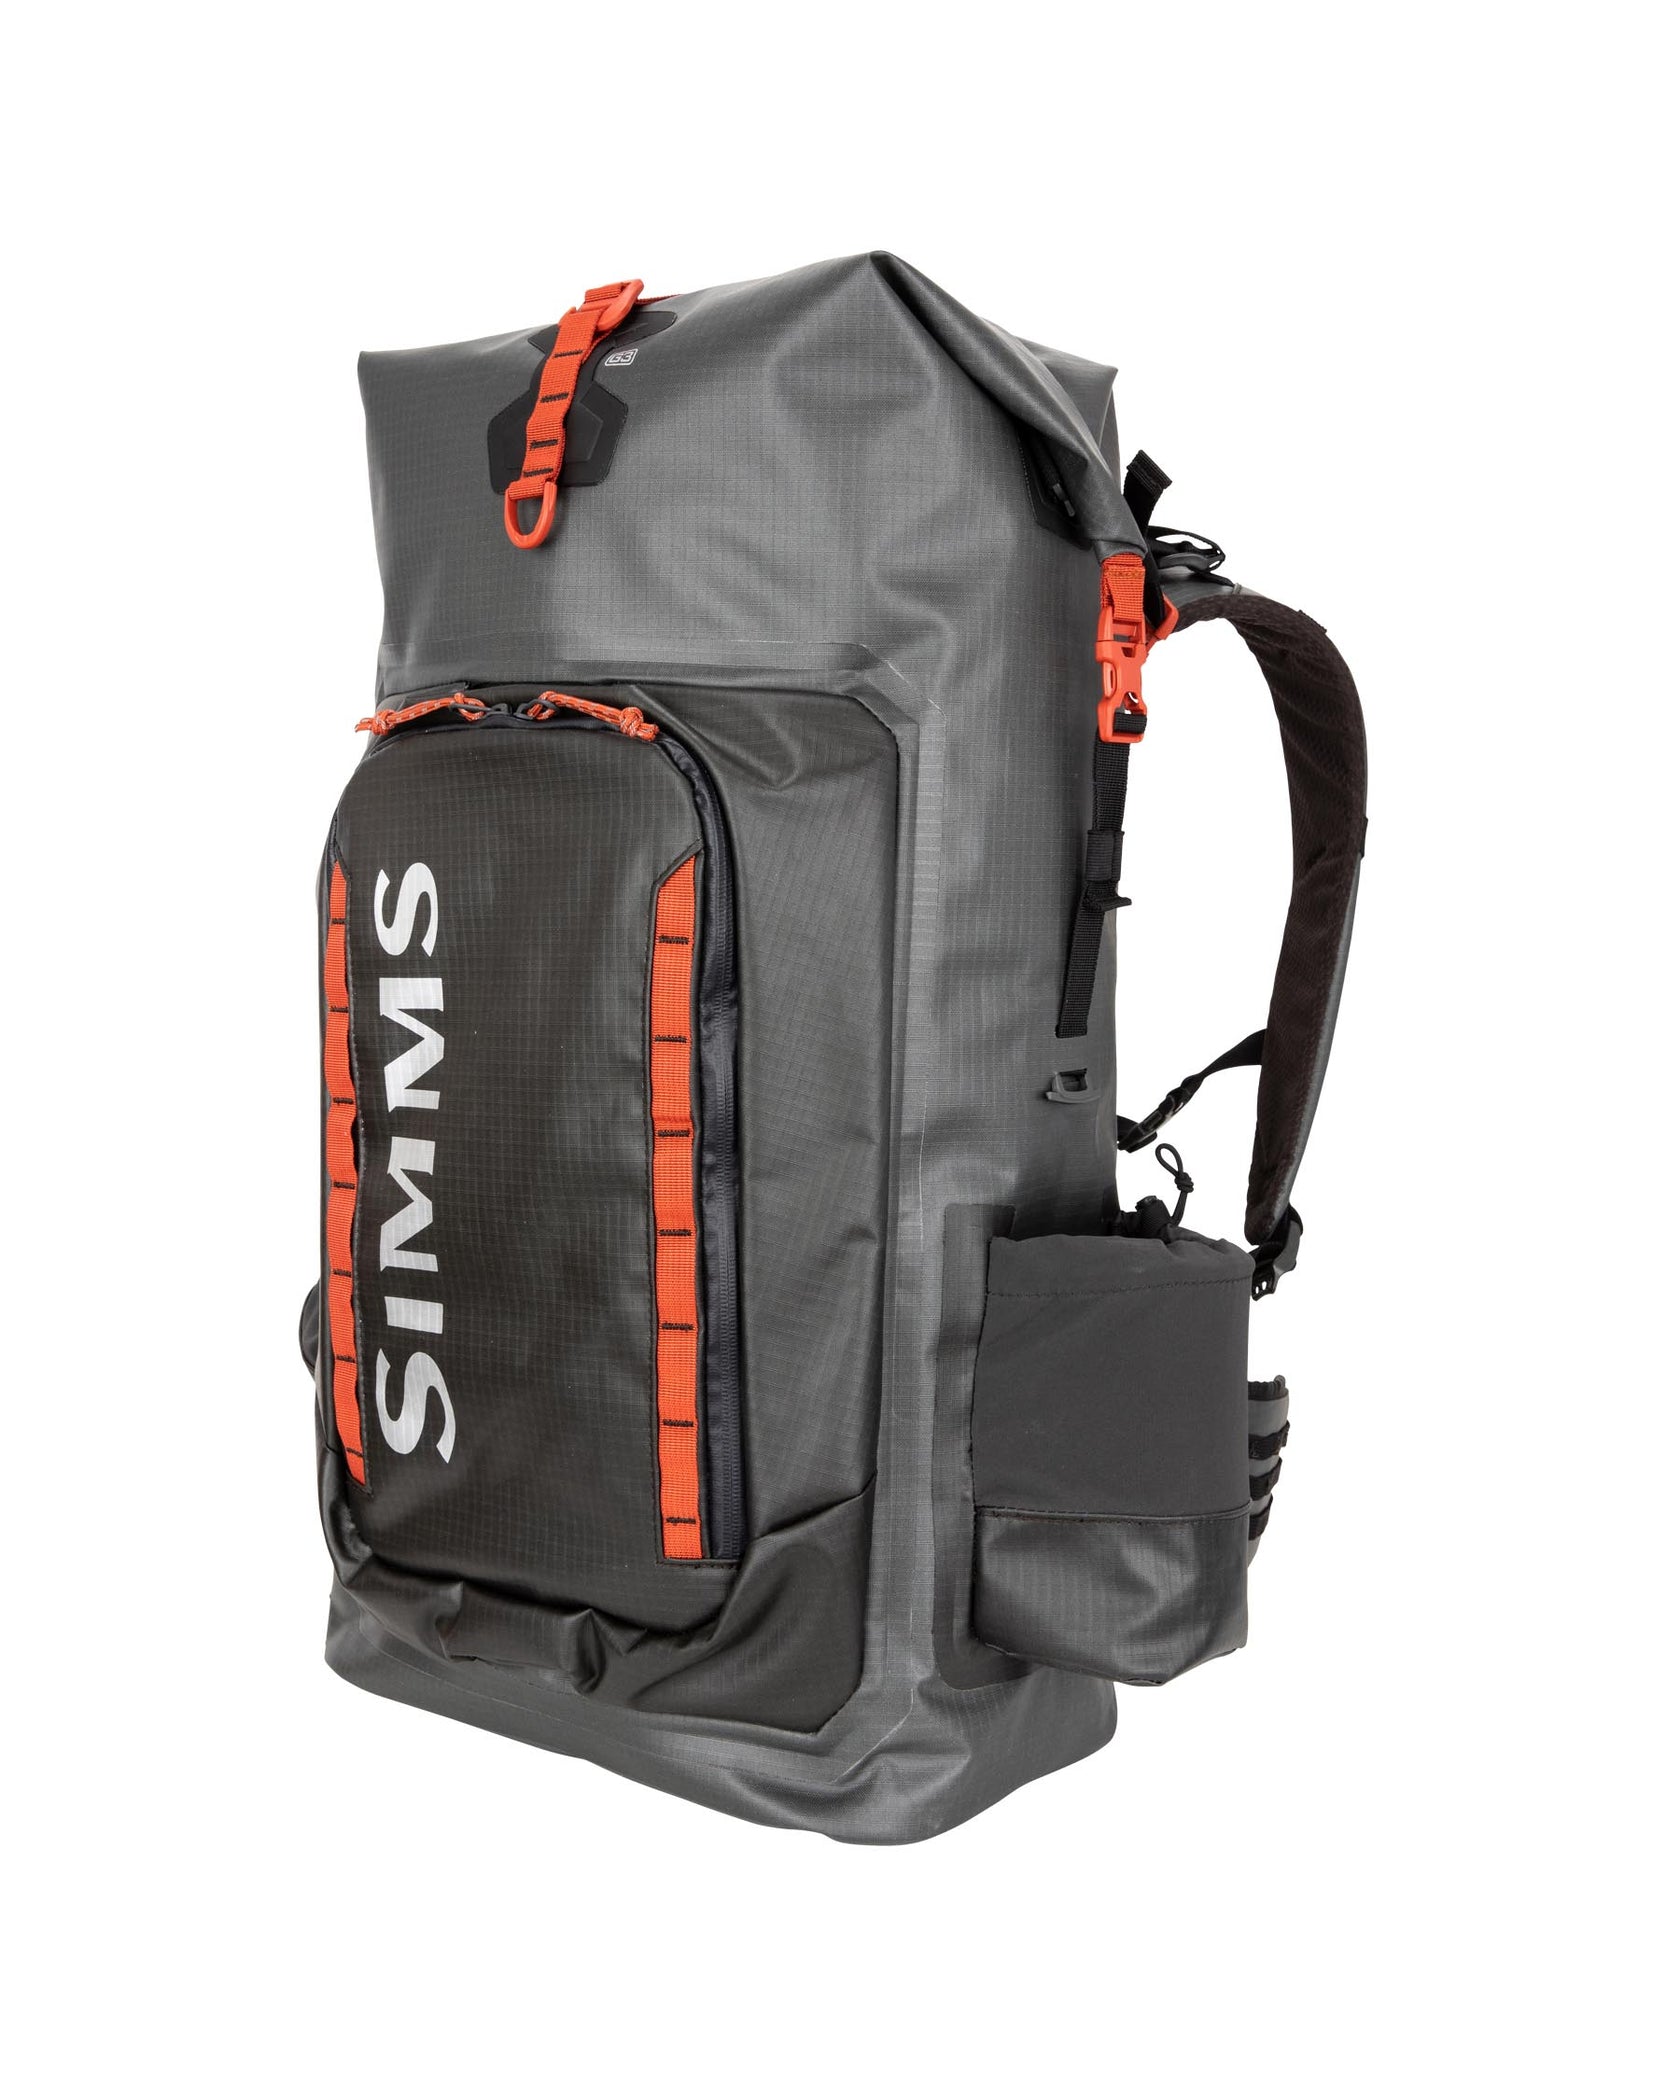 Simms / G3 Guide Backpack